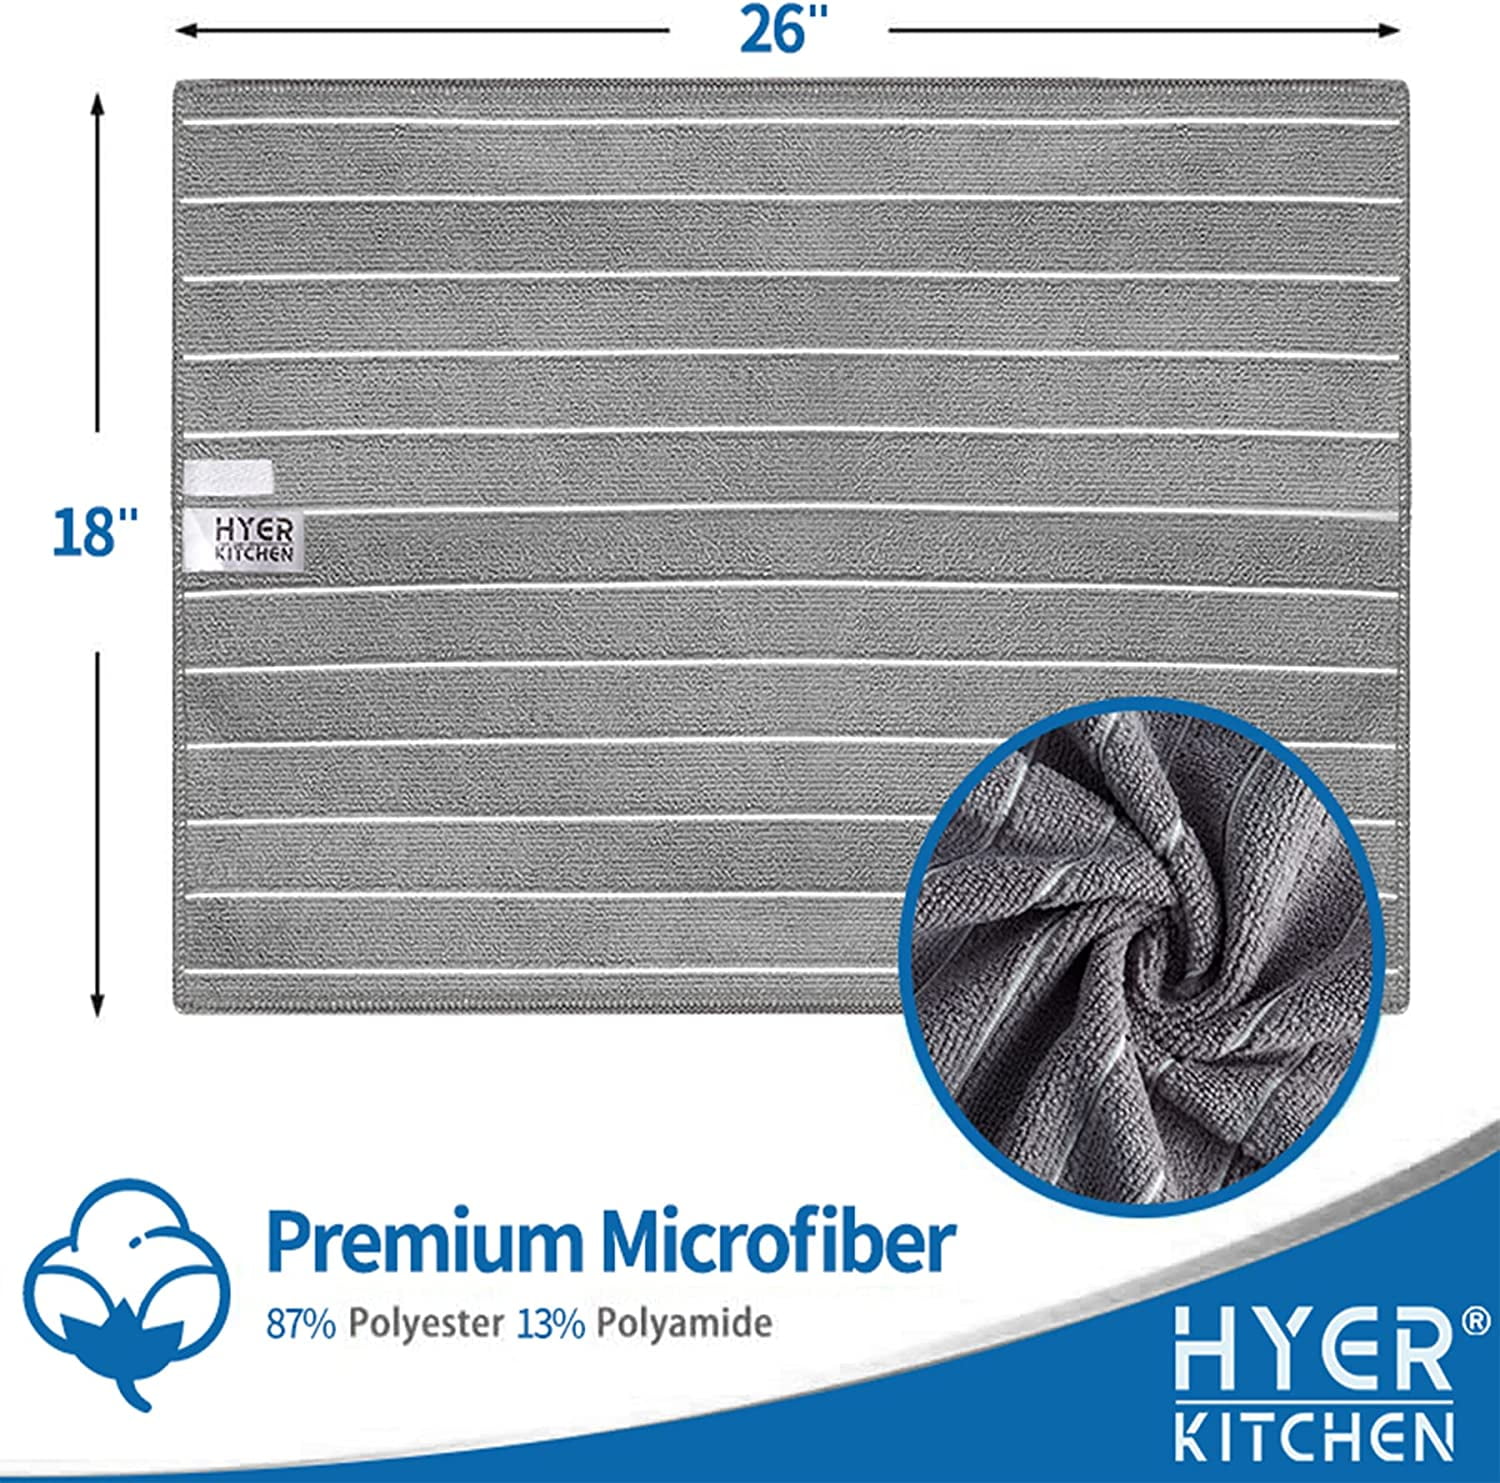 HYER KITCHEN Microfiber Dish Towels, Stripe Designed, Super Soft and  Absorbent Dish Cloths, Pack of 8, 12 x 12 Inch, Gray